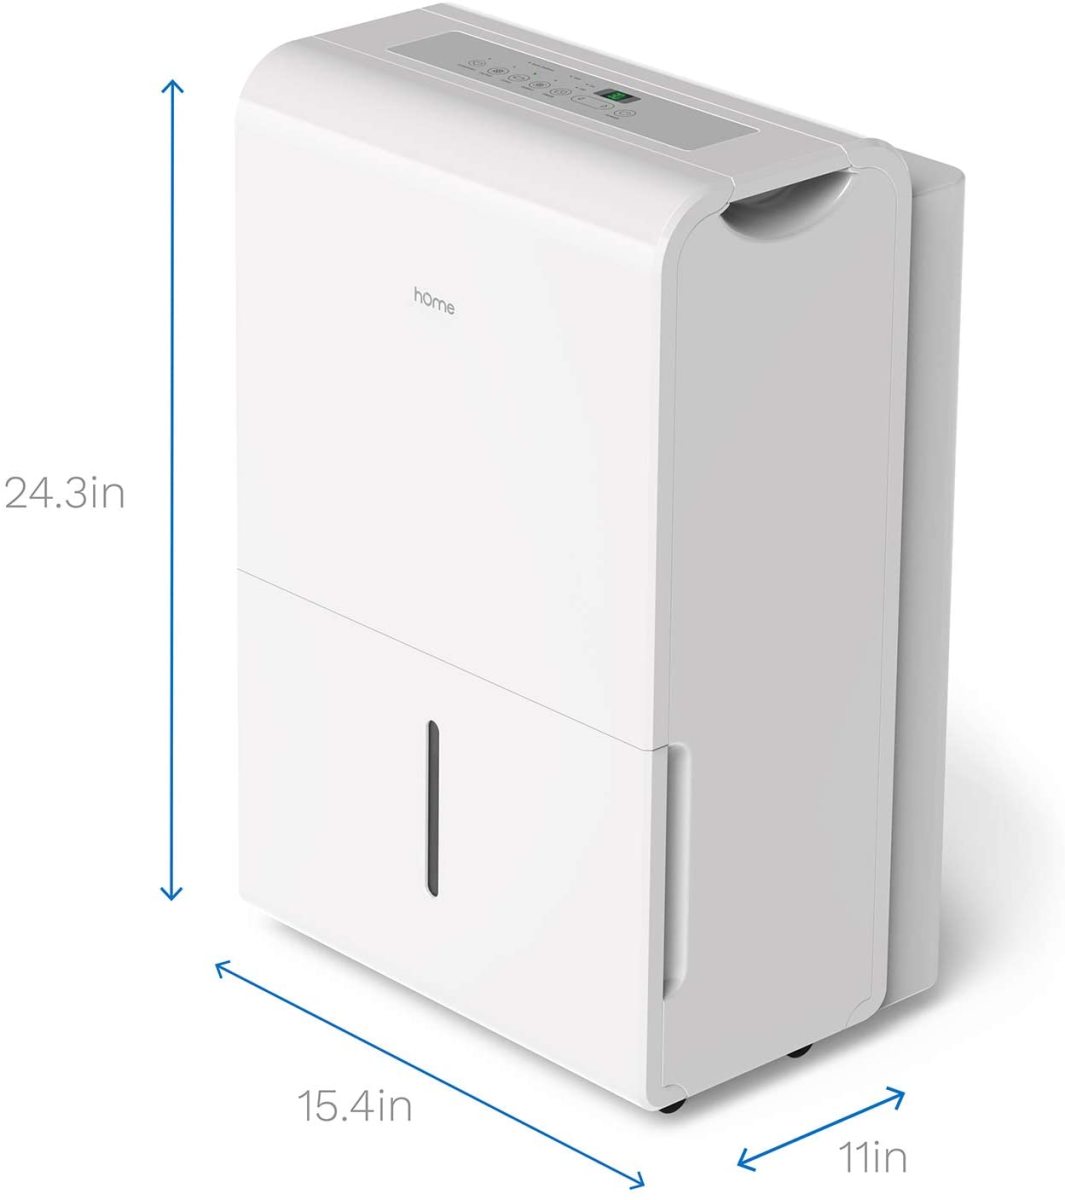 homelabs-4-500-sq-ft-energy-star-dehumidifier-pros-and-cons-from-an-owner